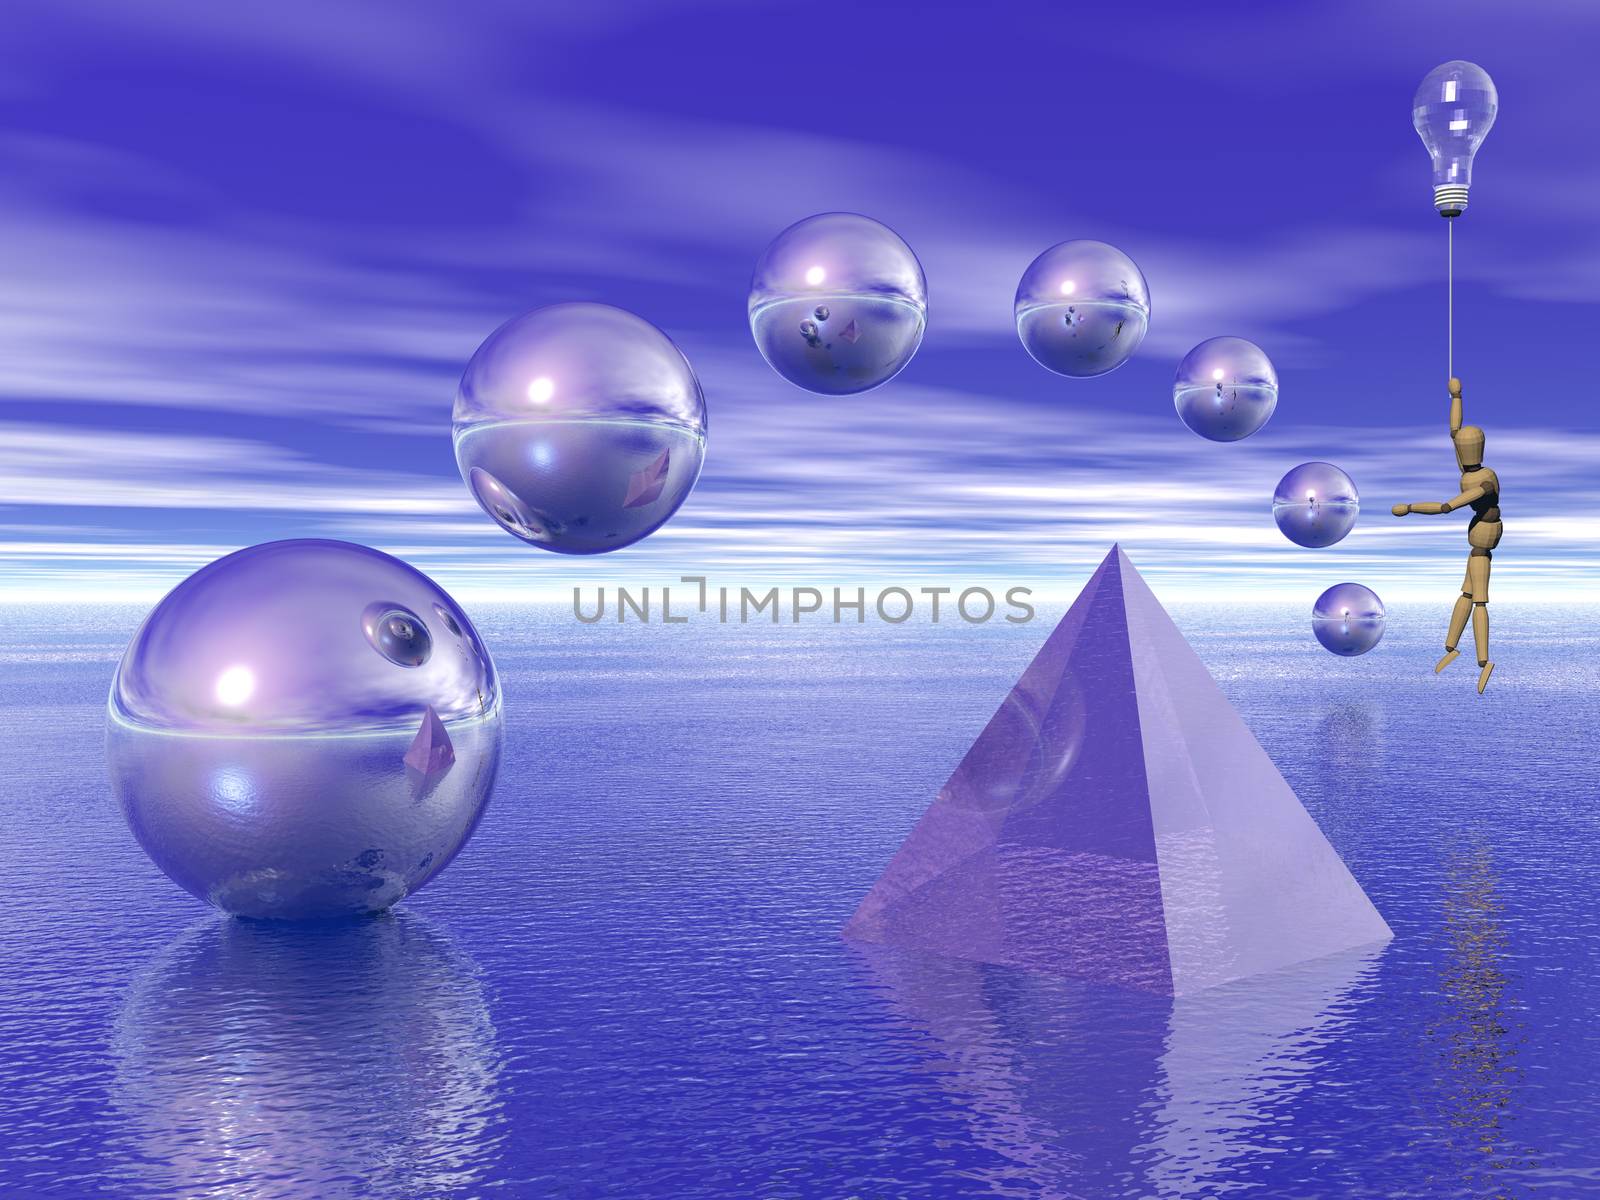 Geometric figures above water surface by applesstock